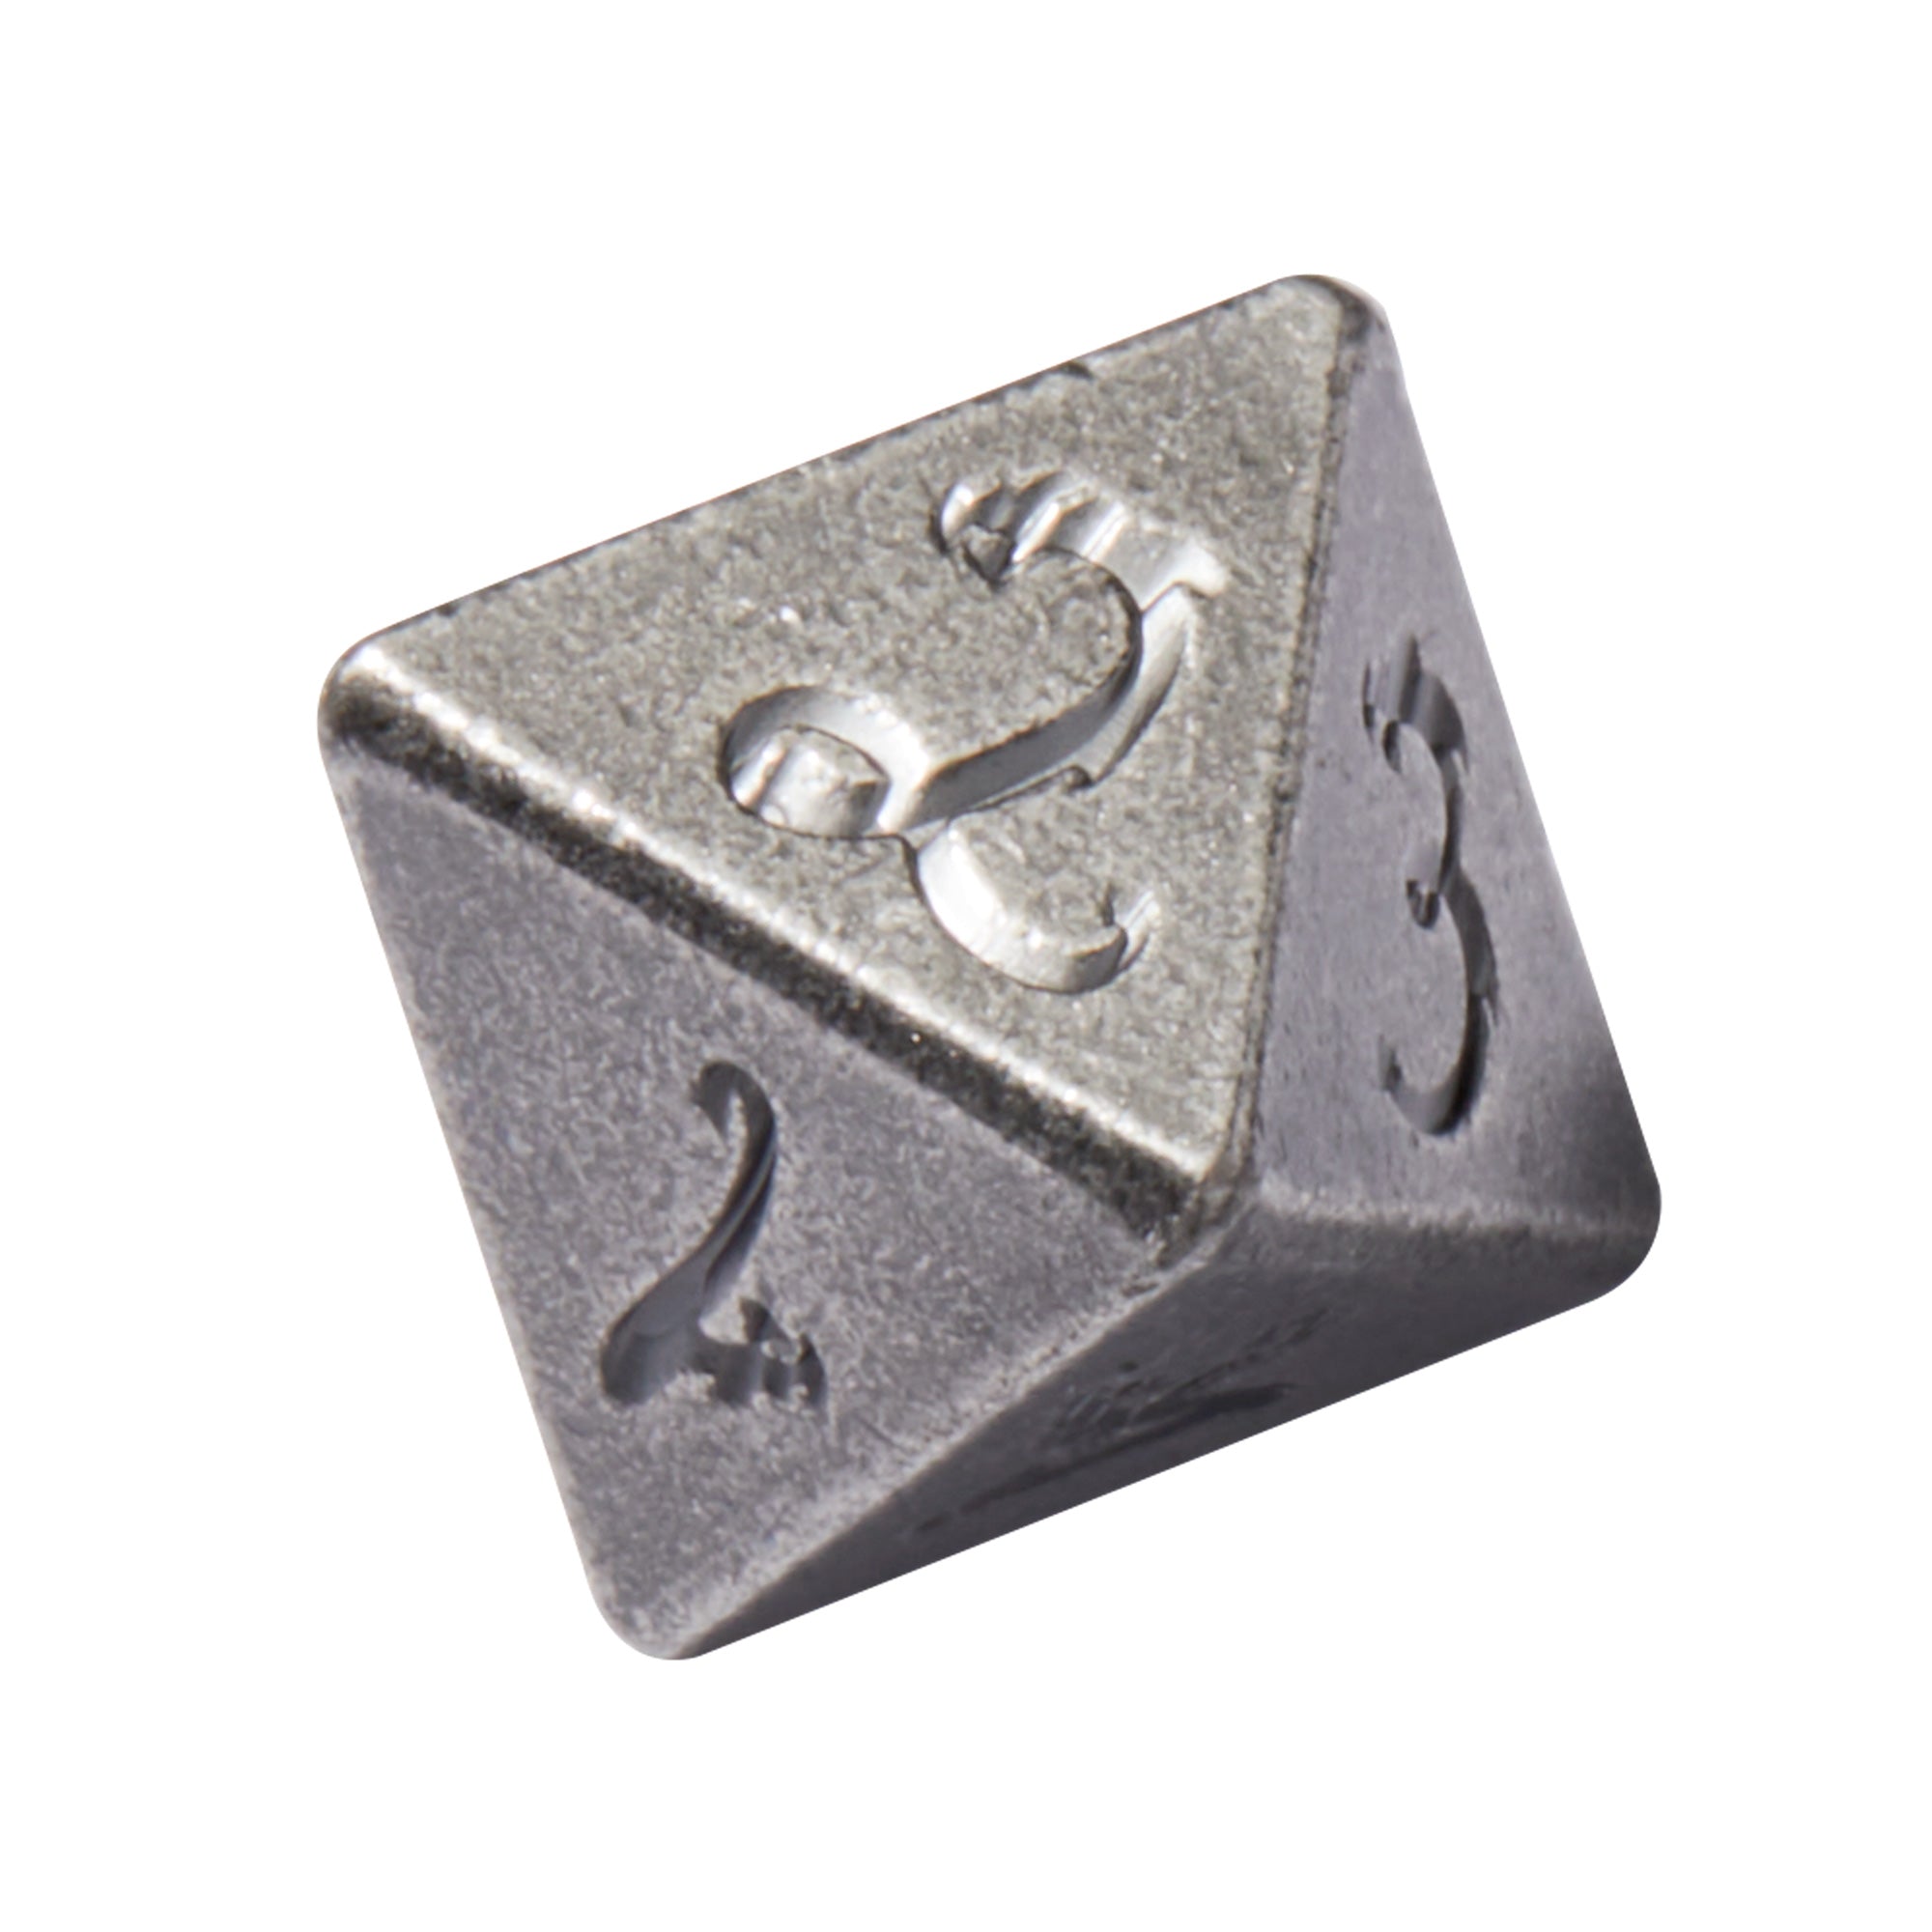 Dwarven Mines Silver Colored Metal 7pc Dice Set | Rollacrit